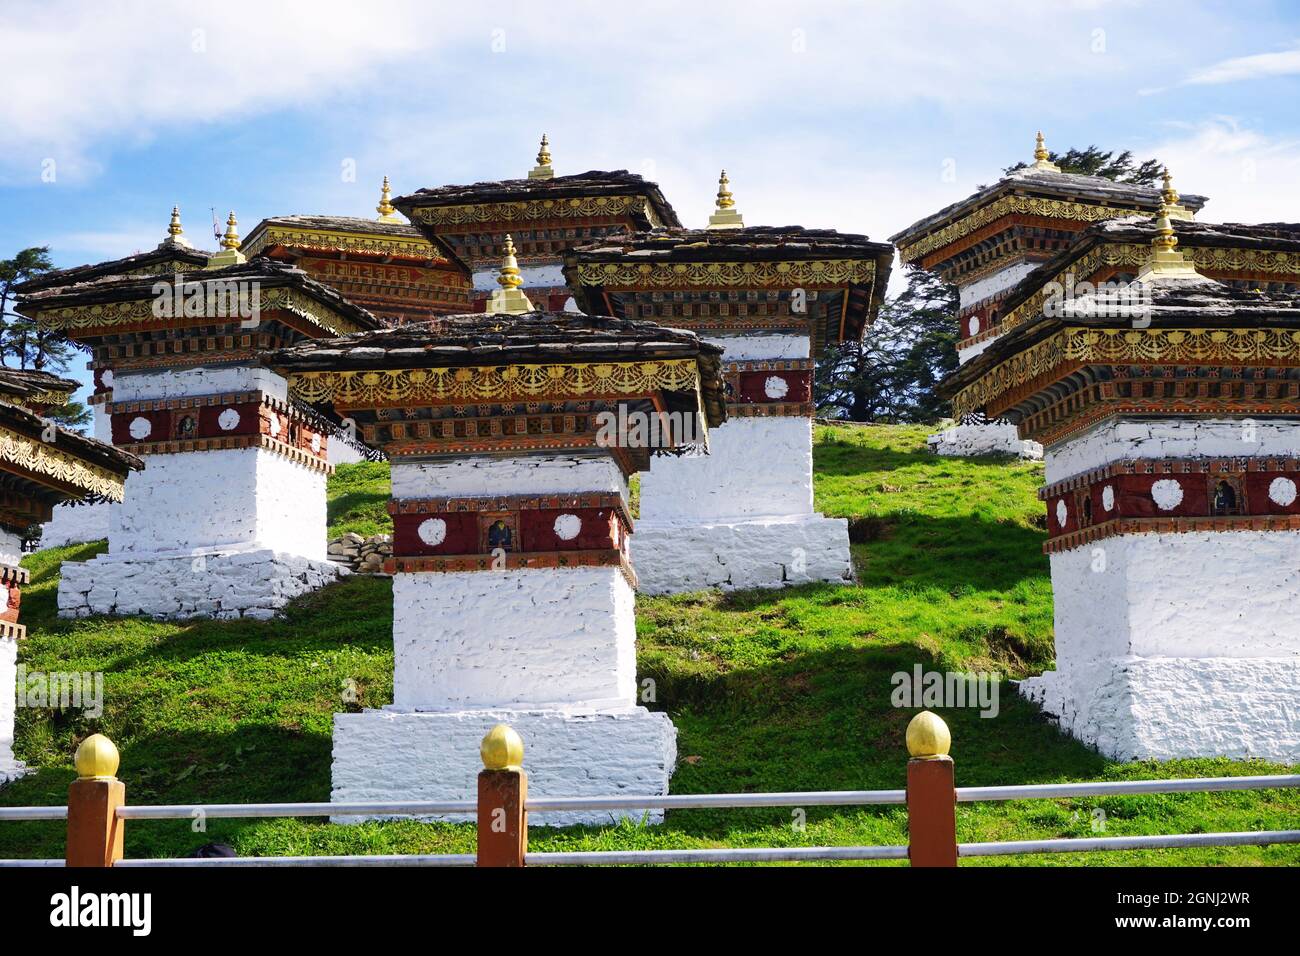 A view of some of the 108 identical Druk Wangyal Chortens located at Bhutan’s Dochula Pass on the road from Thimphu to Punakha with clear blue sky Stock Photo